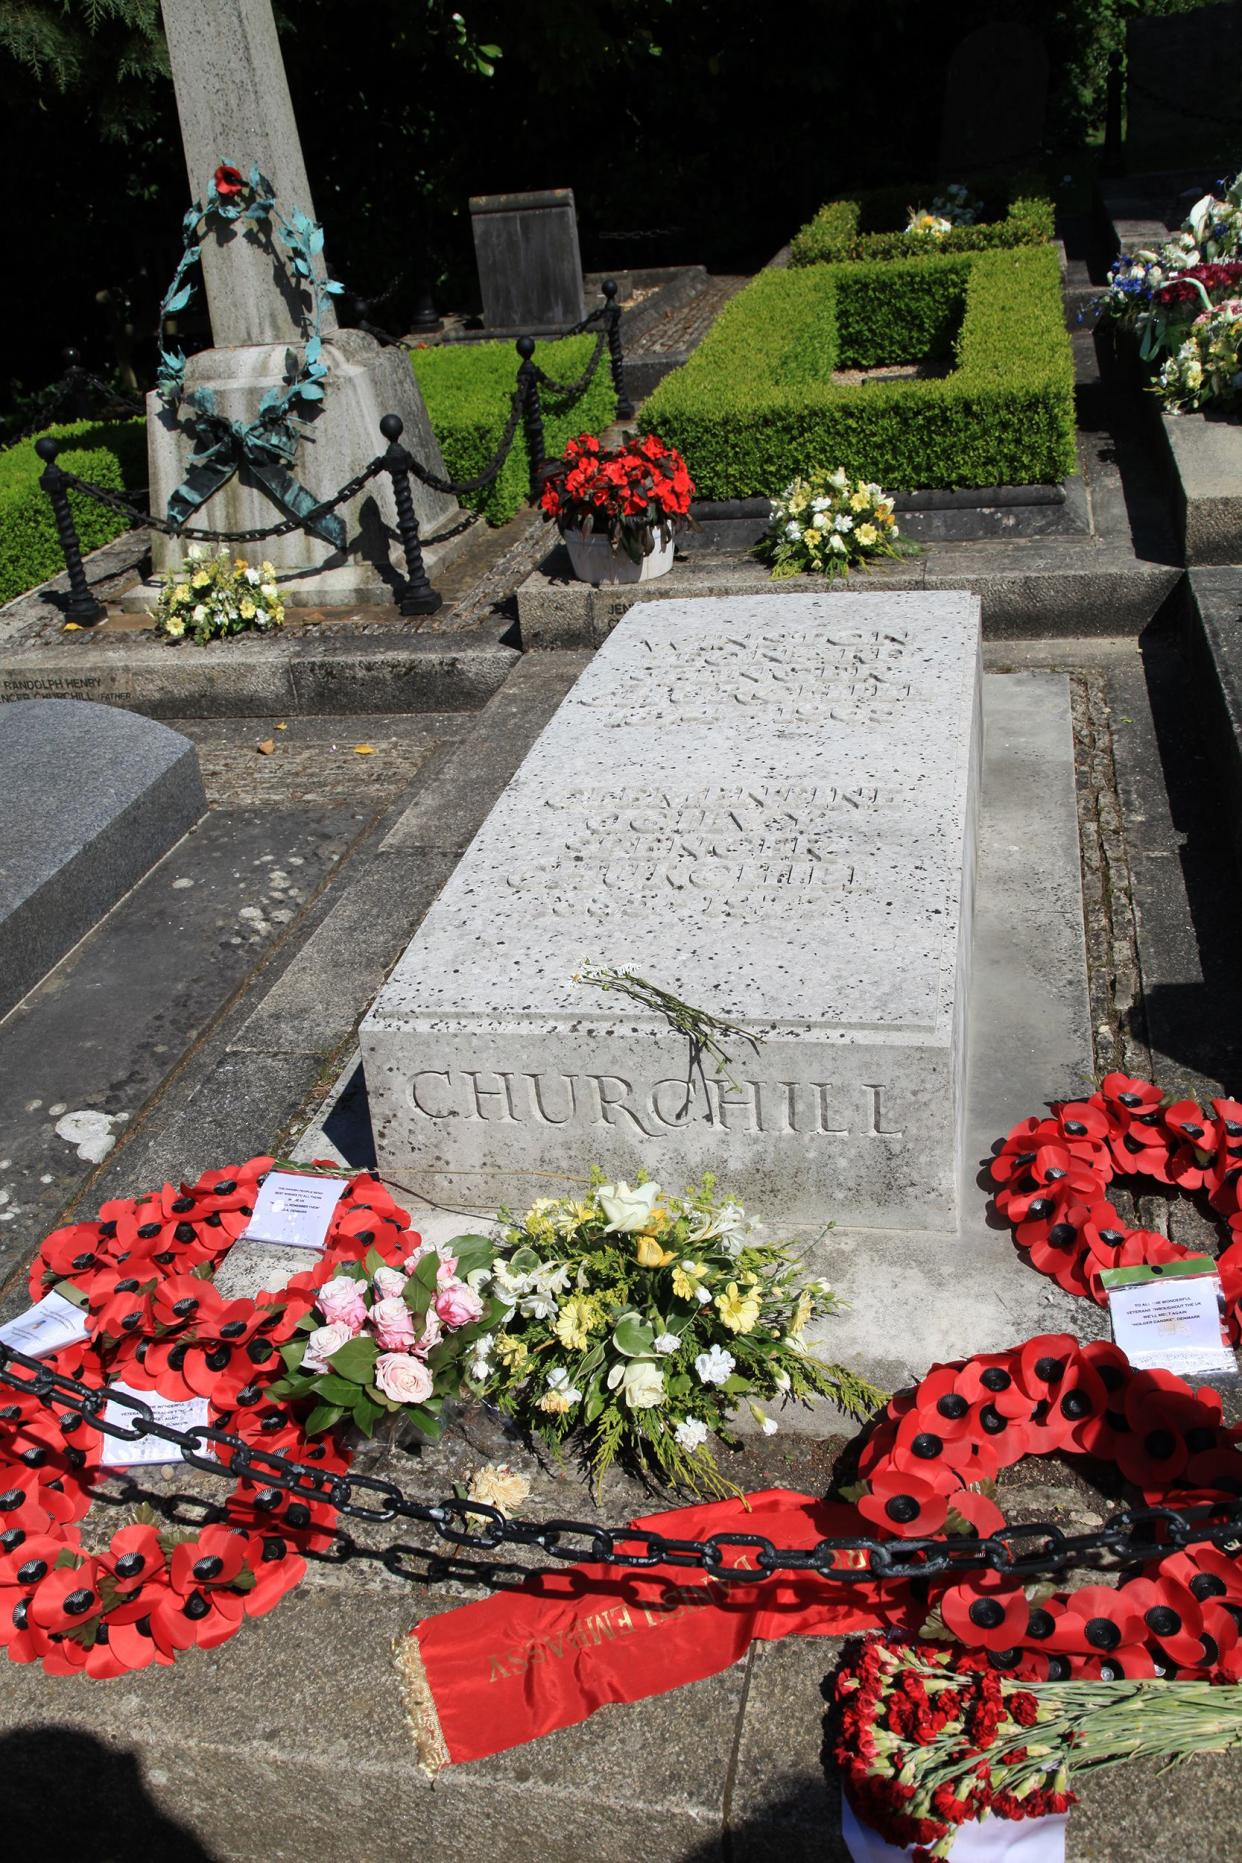 Winston Churchill's tomb in the family plot in the St. Martin Churchyard, Westminster Abbey, London surrounded by other elaborate tombs with flowers and paper poppies